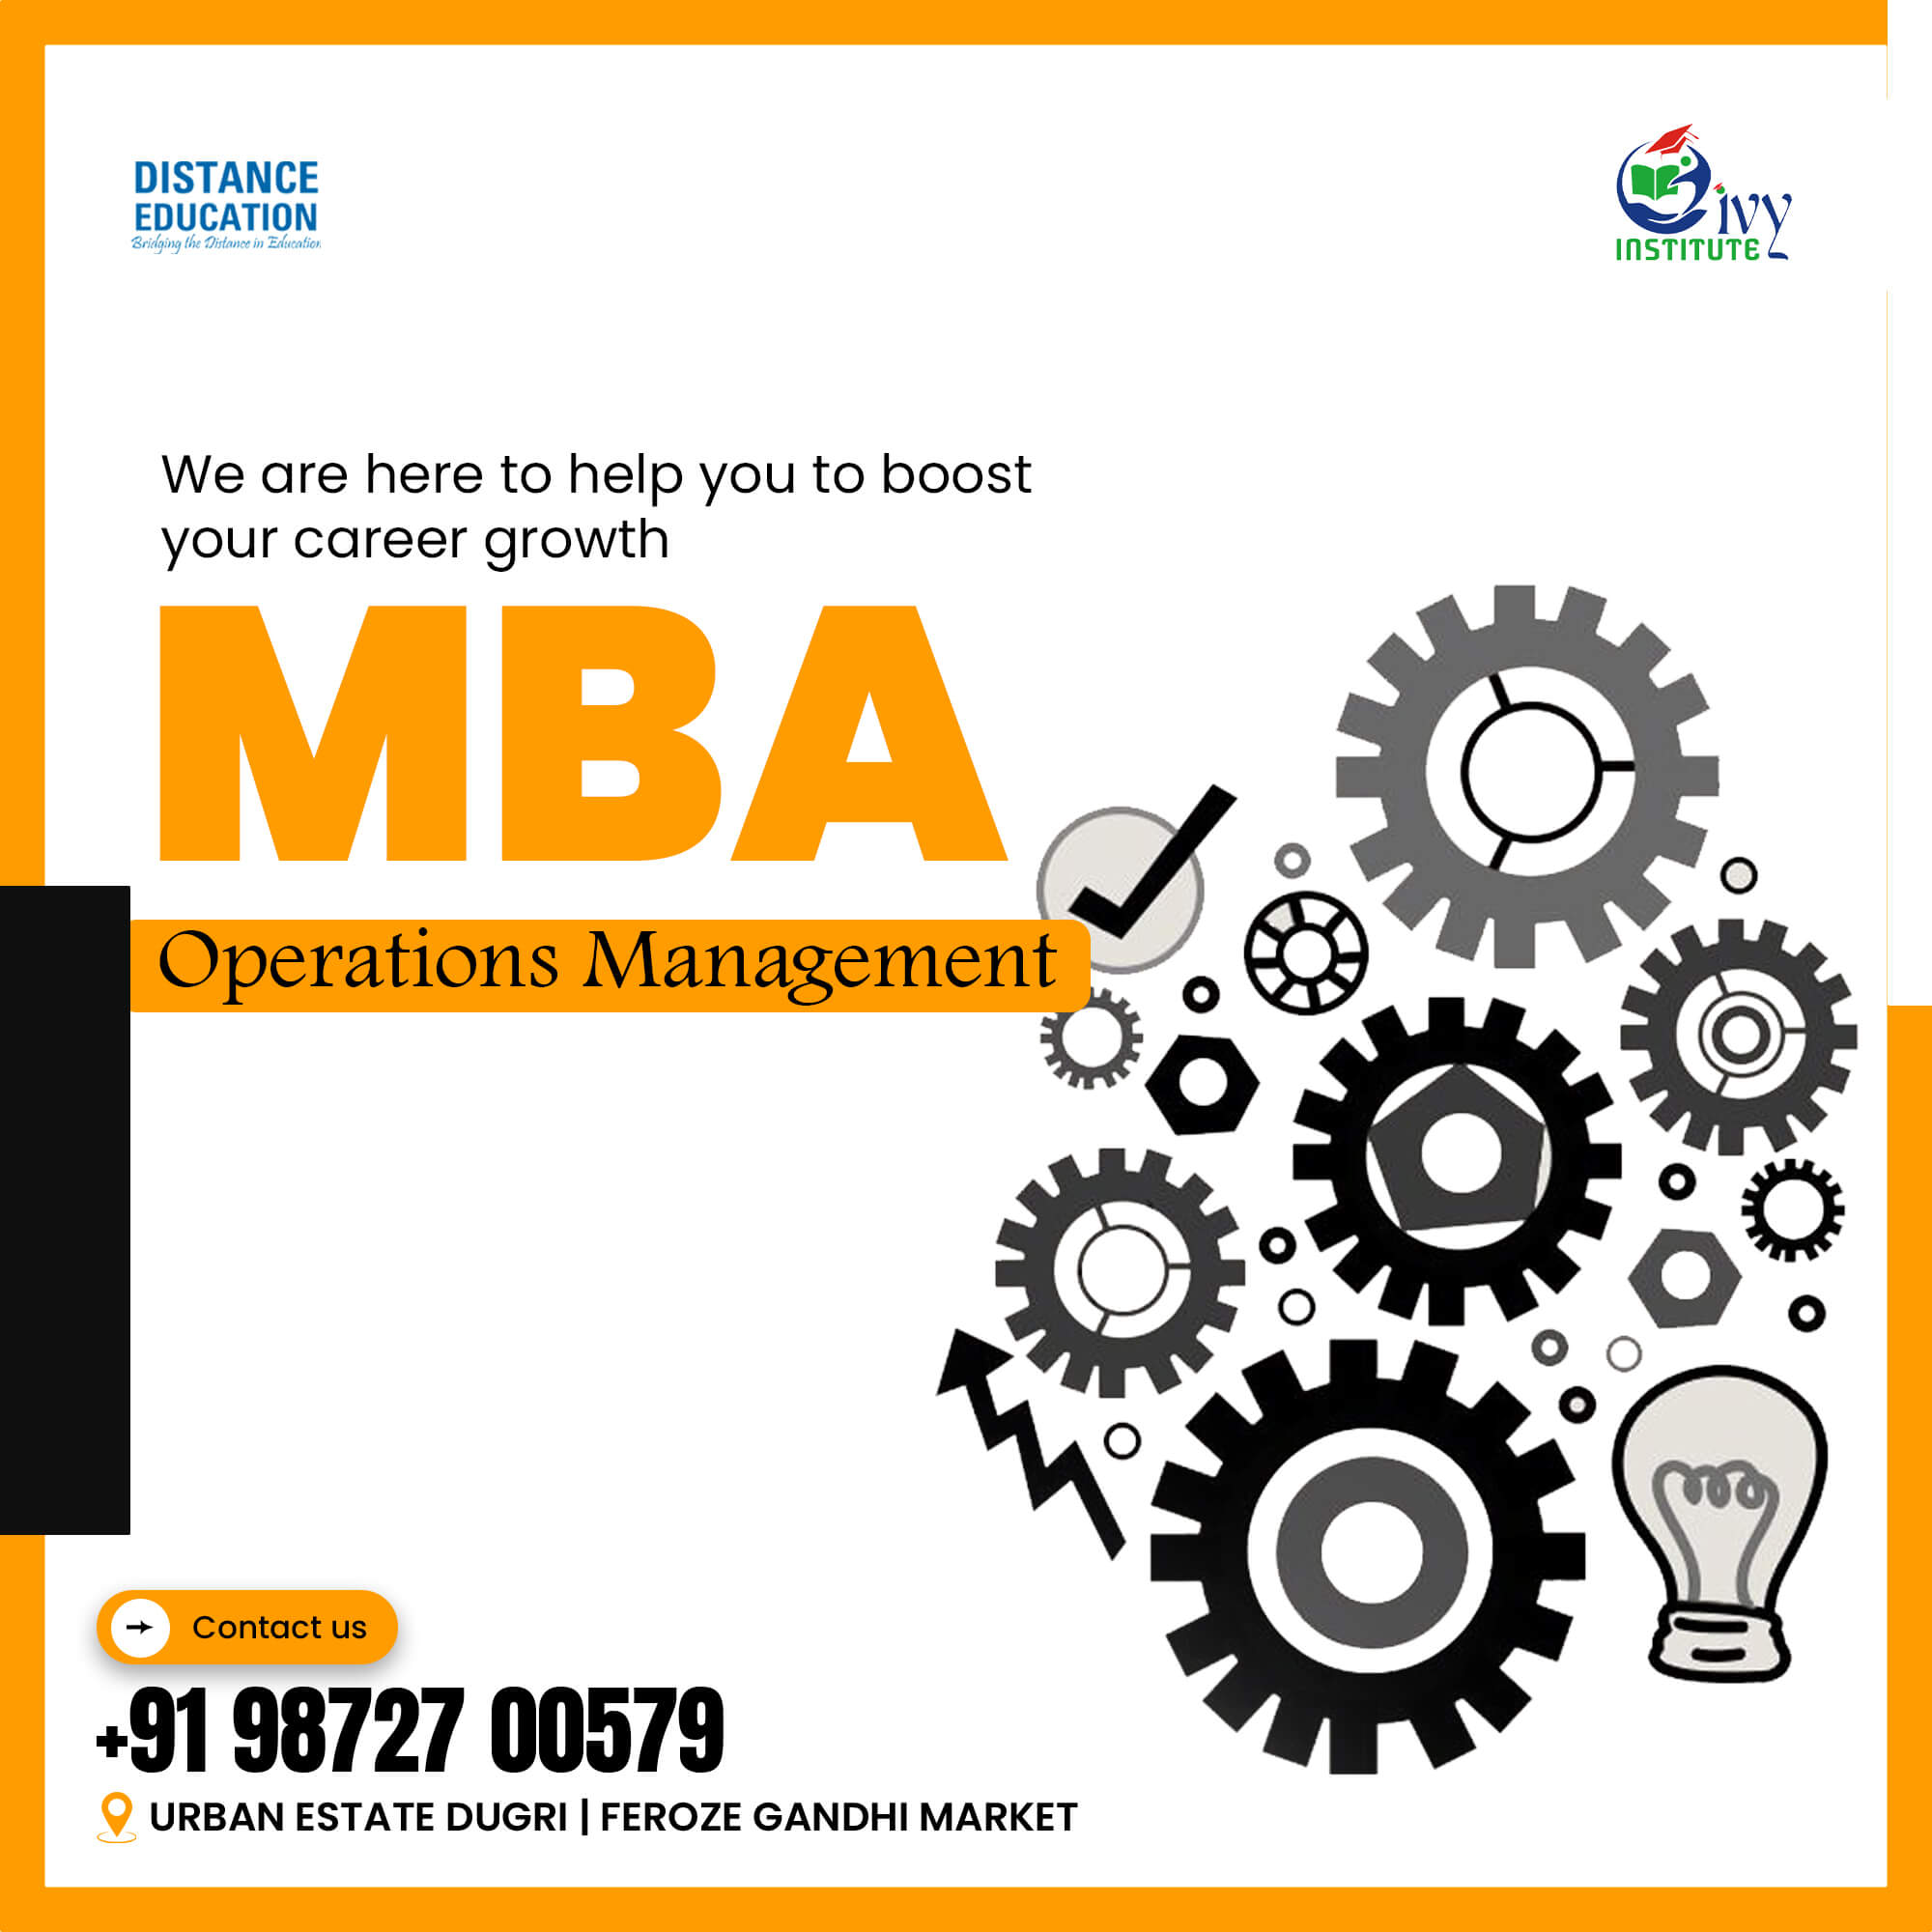 Pursue MBA Operations Management